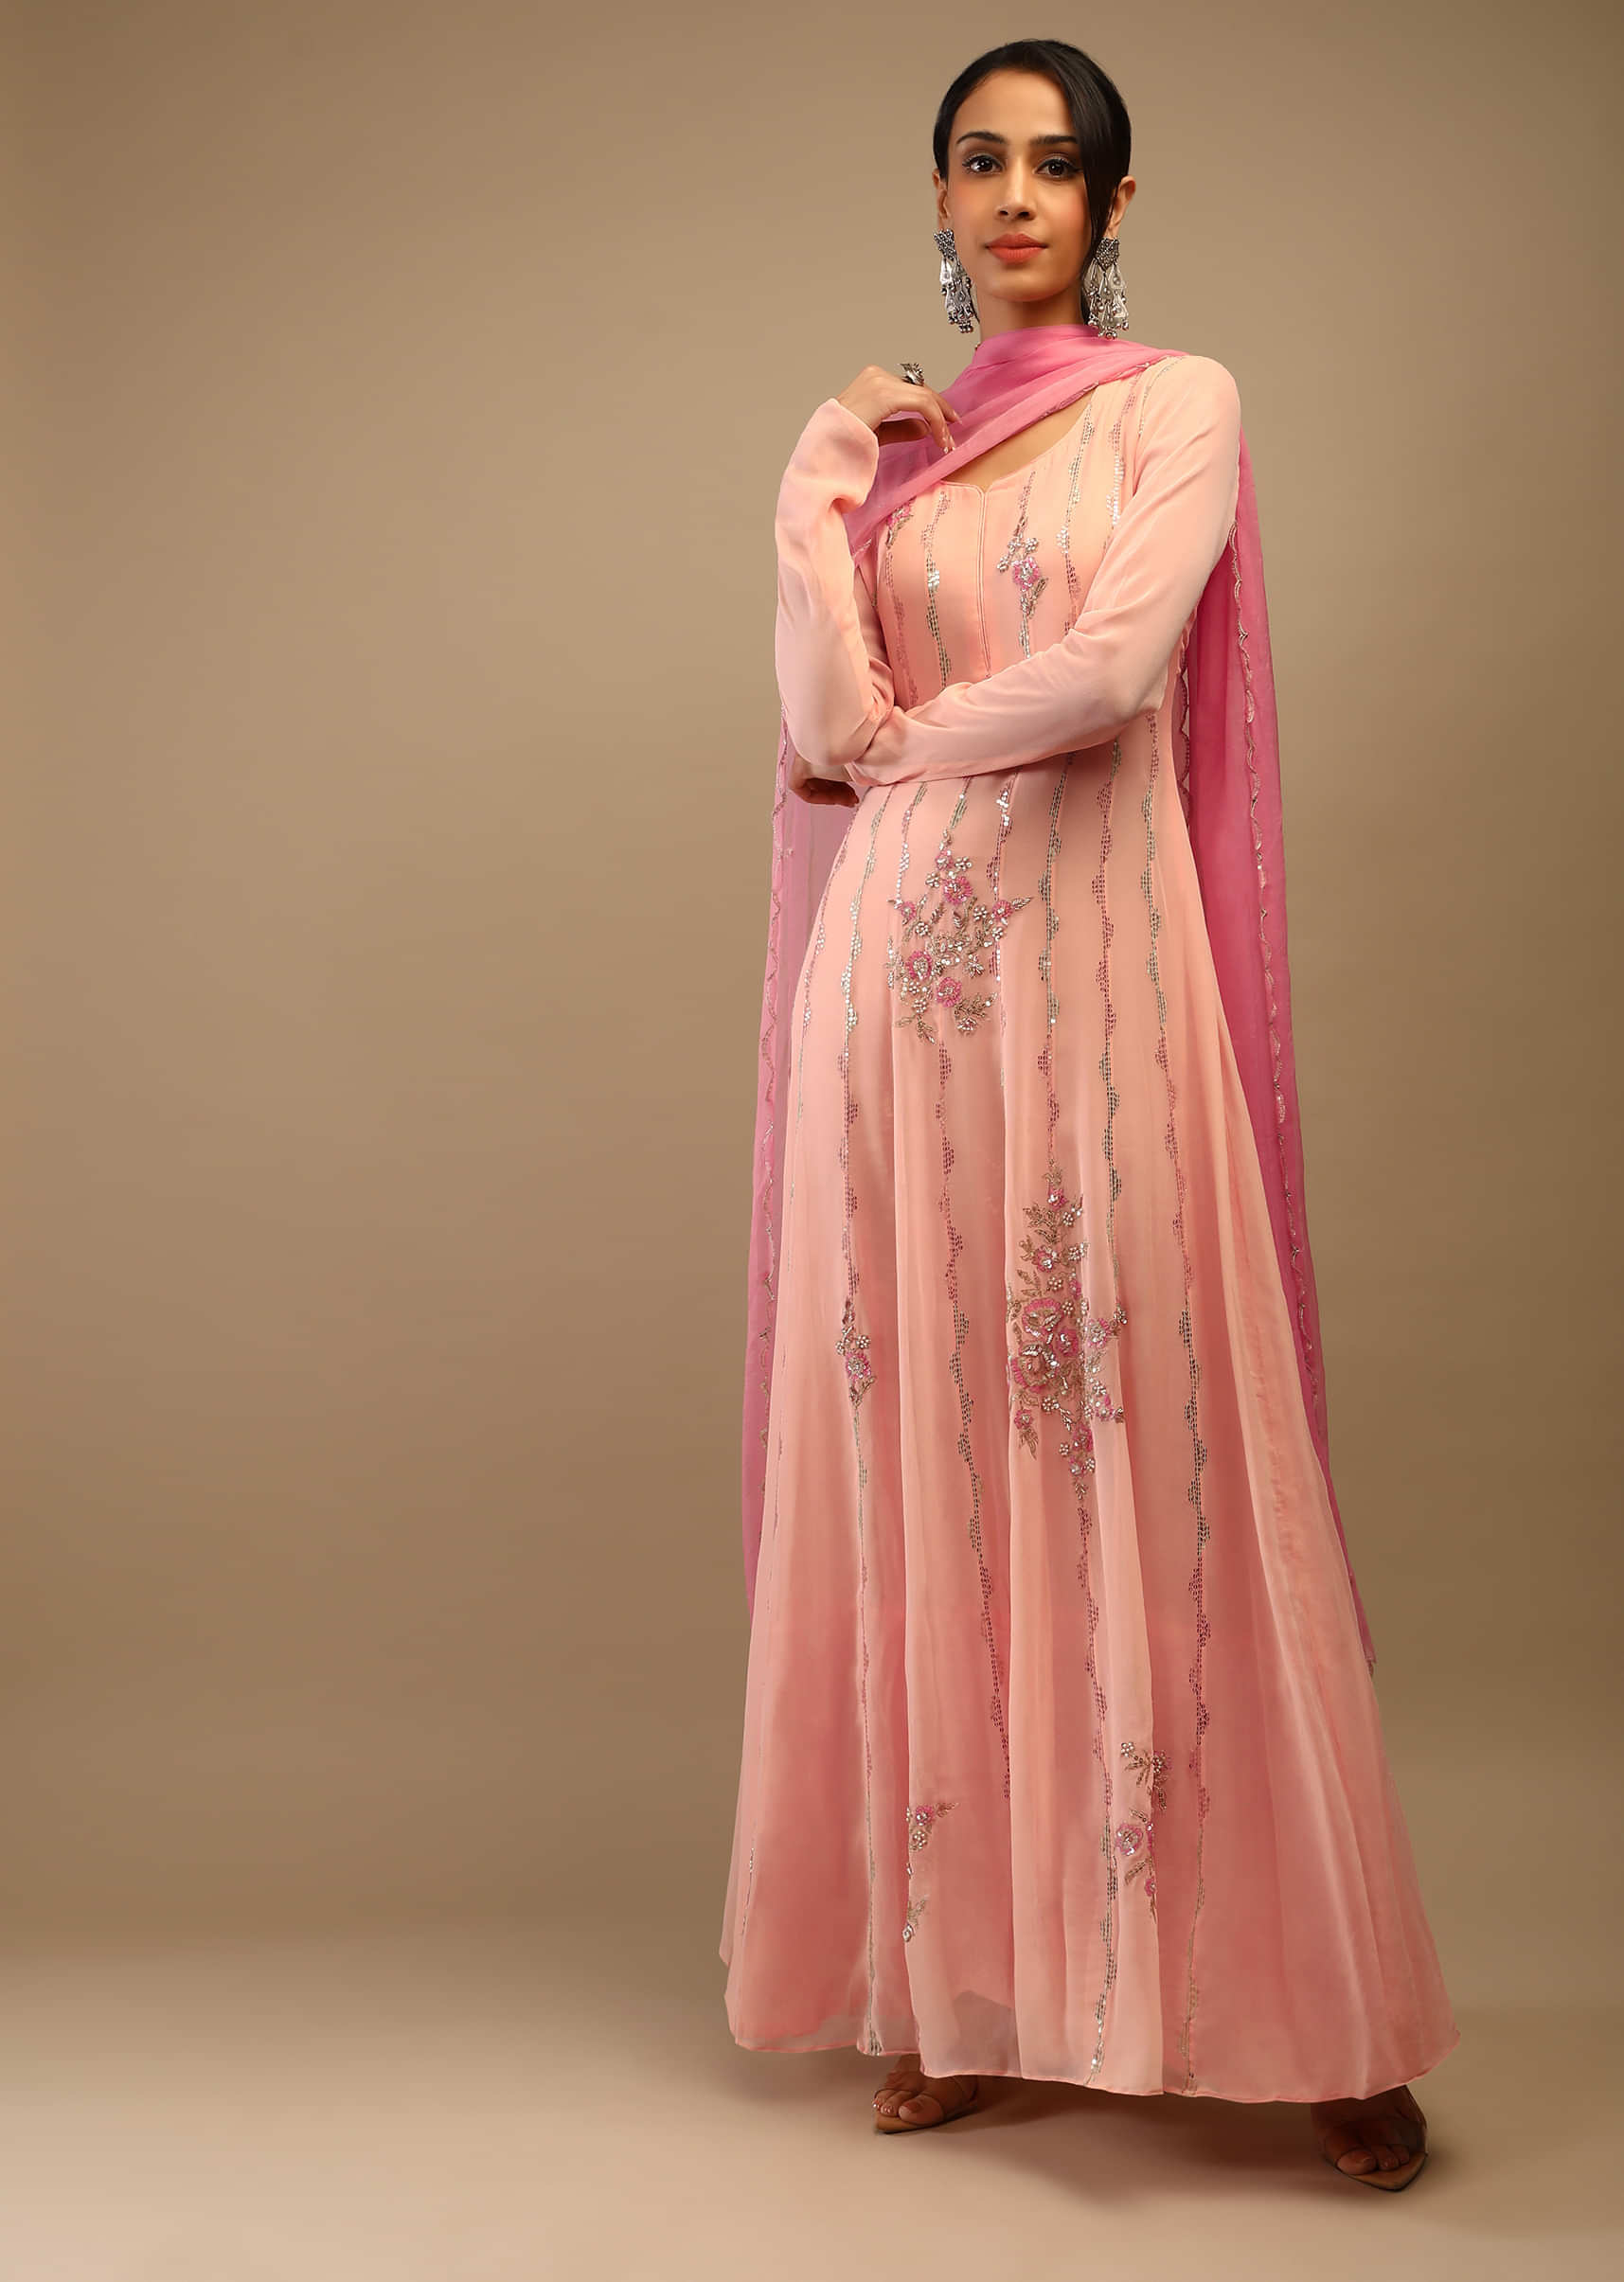 Peach Anarkali Suit In Georgette With Multi Colored Sequins And Cut Dana Embroidered Floral And Ethnic Motifs  